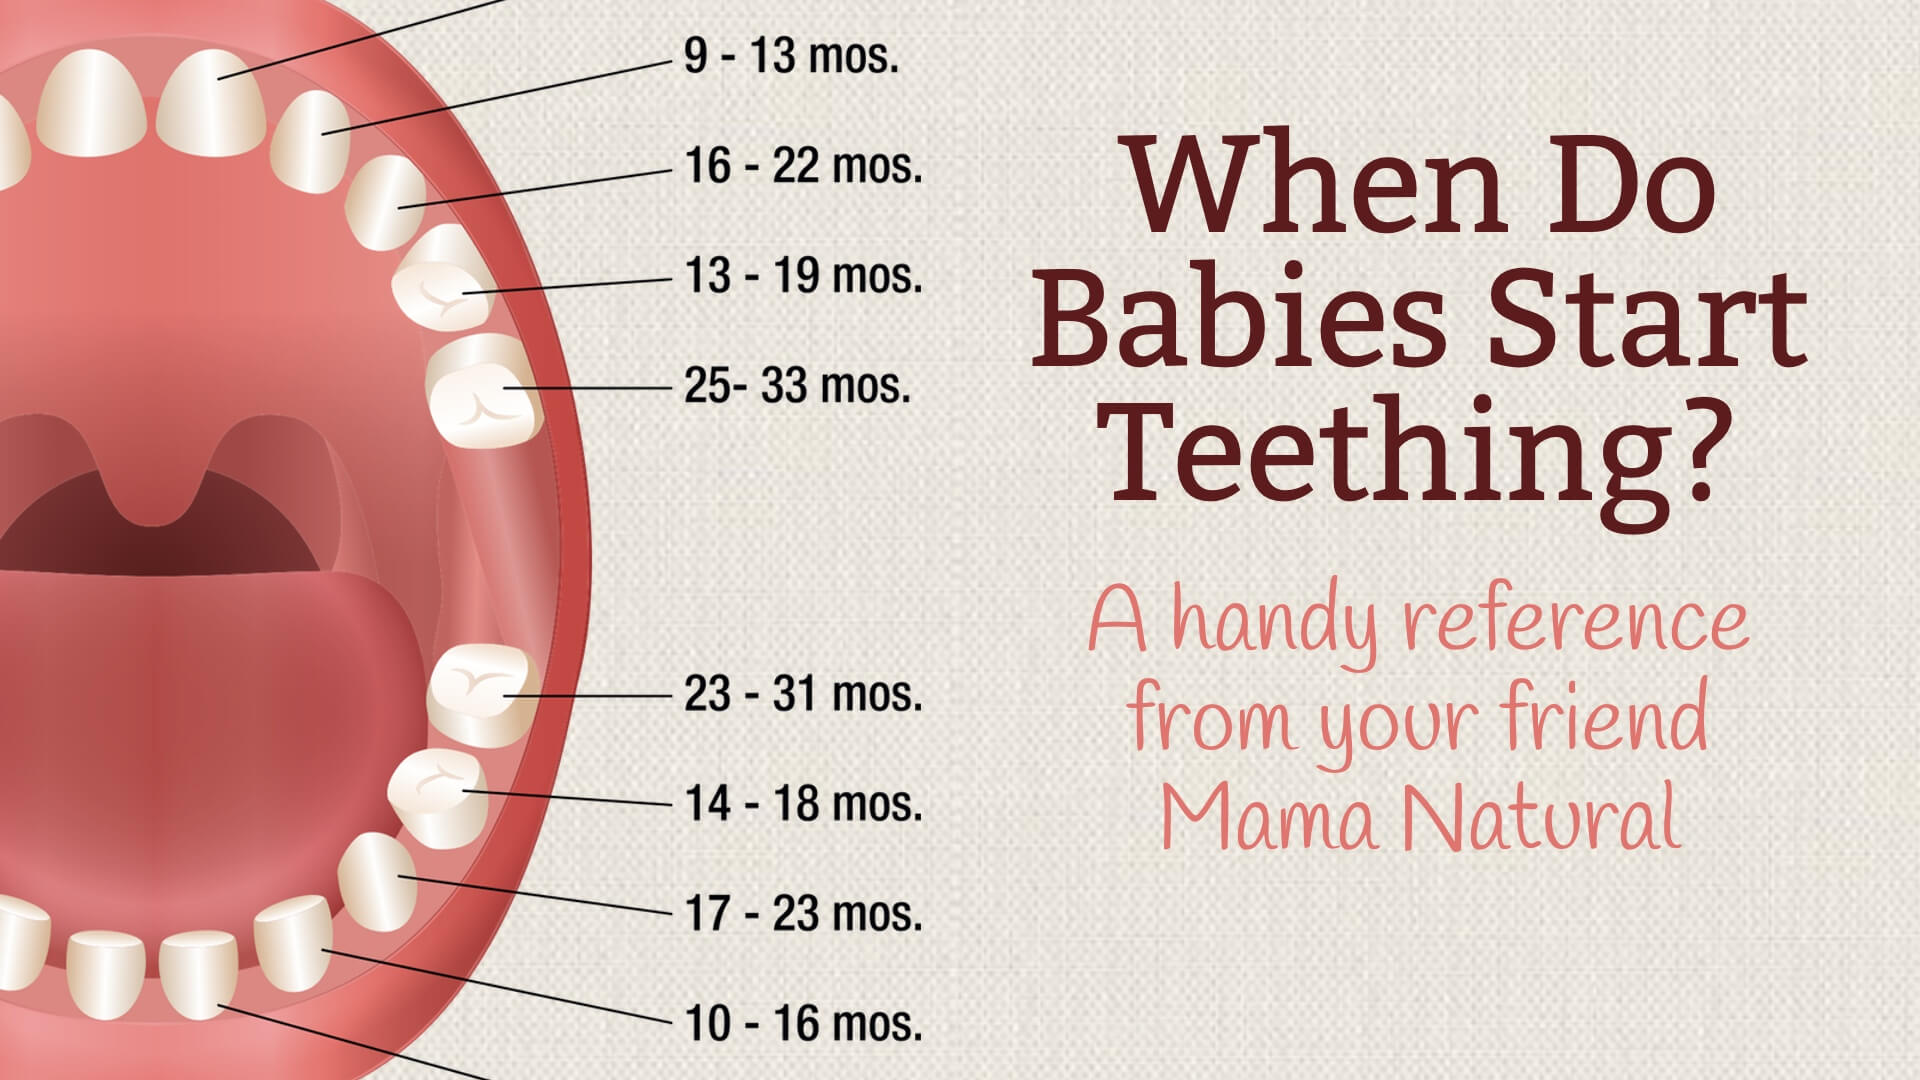 When Do Babies Start Teething? And other baby teething Answers